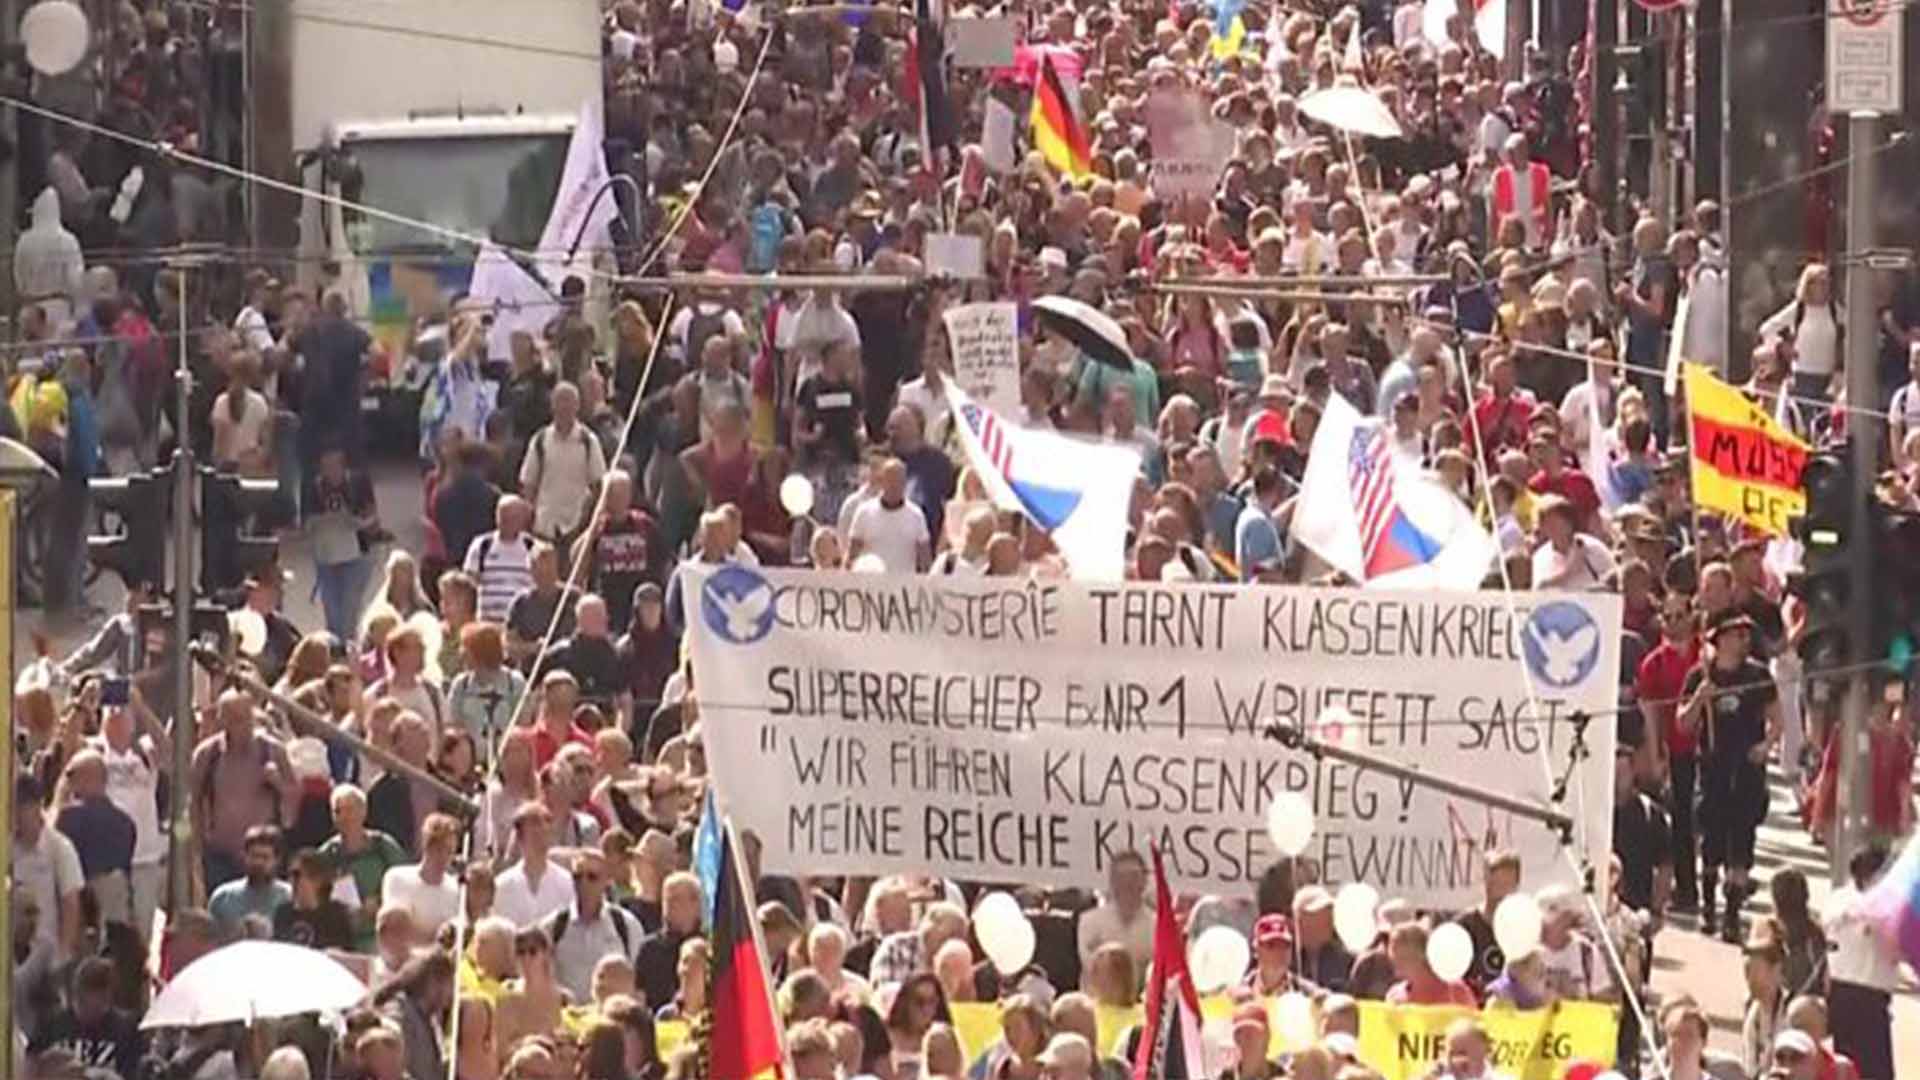 Protests Despite Restrictions in Germany - More than 300 Arrested